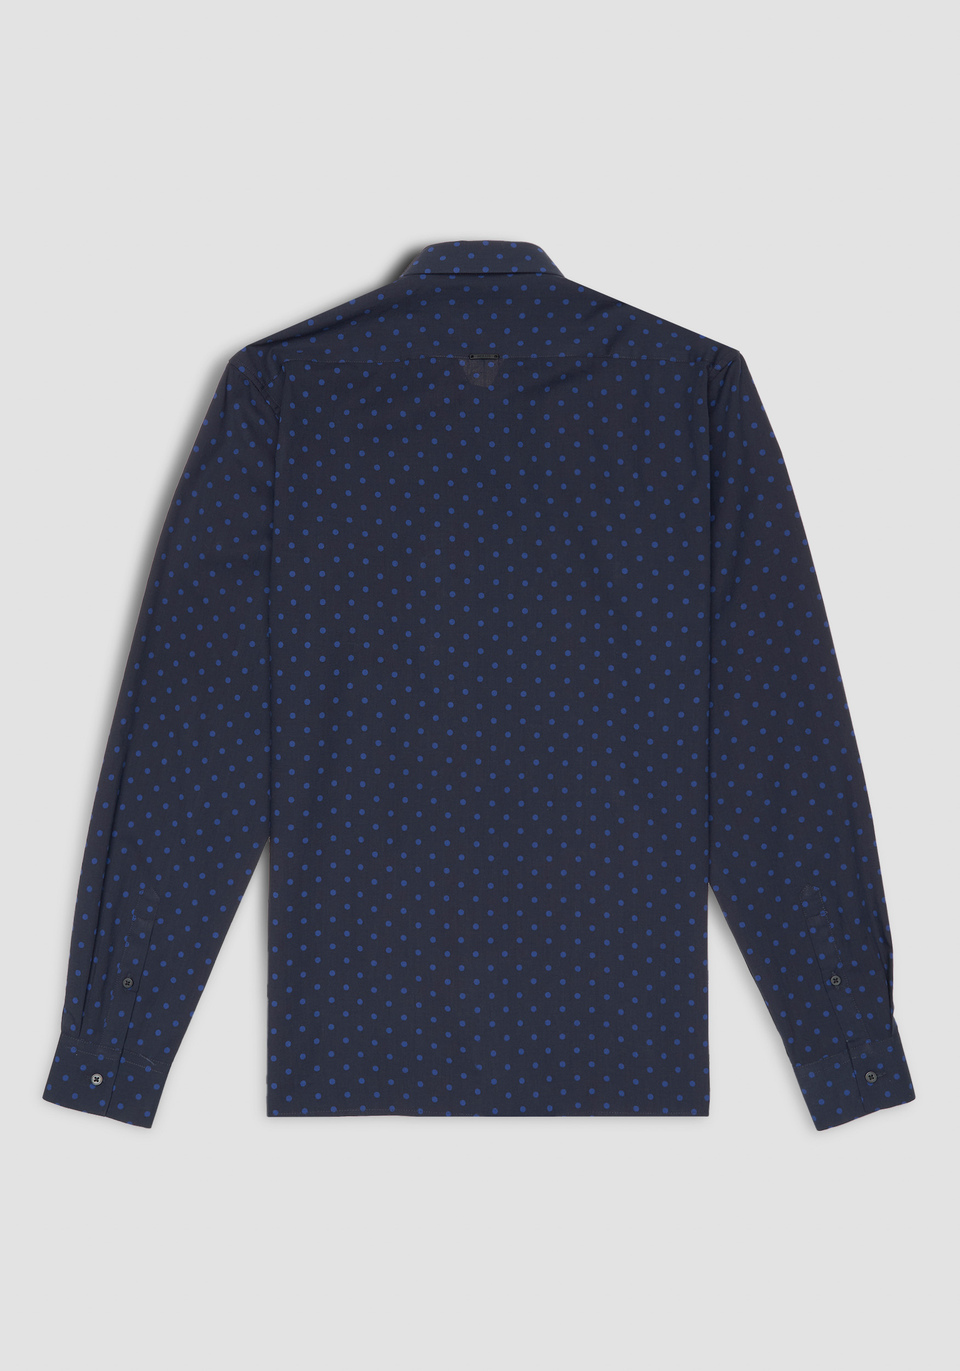 STRAIGHT FIT SHIRT IN COTTON BLEND WITH POLKA DOT PRINT - Antony Morato Online Shop